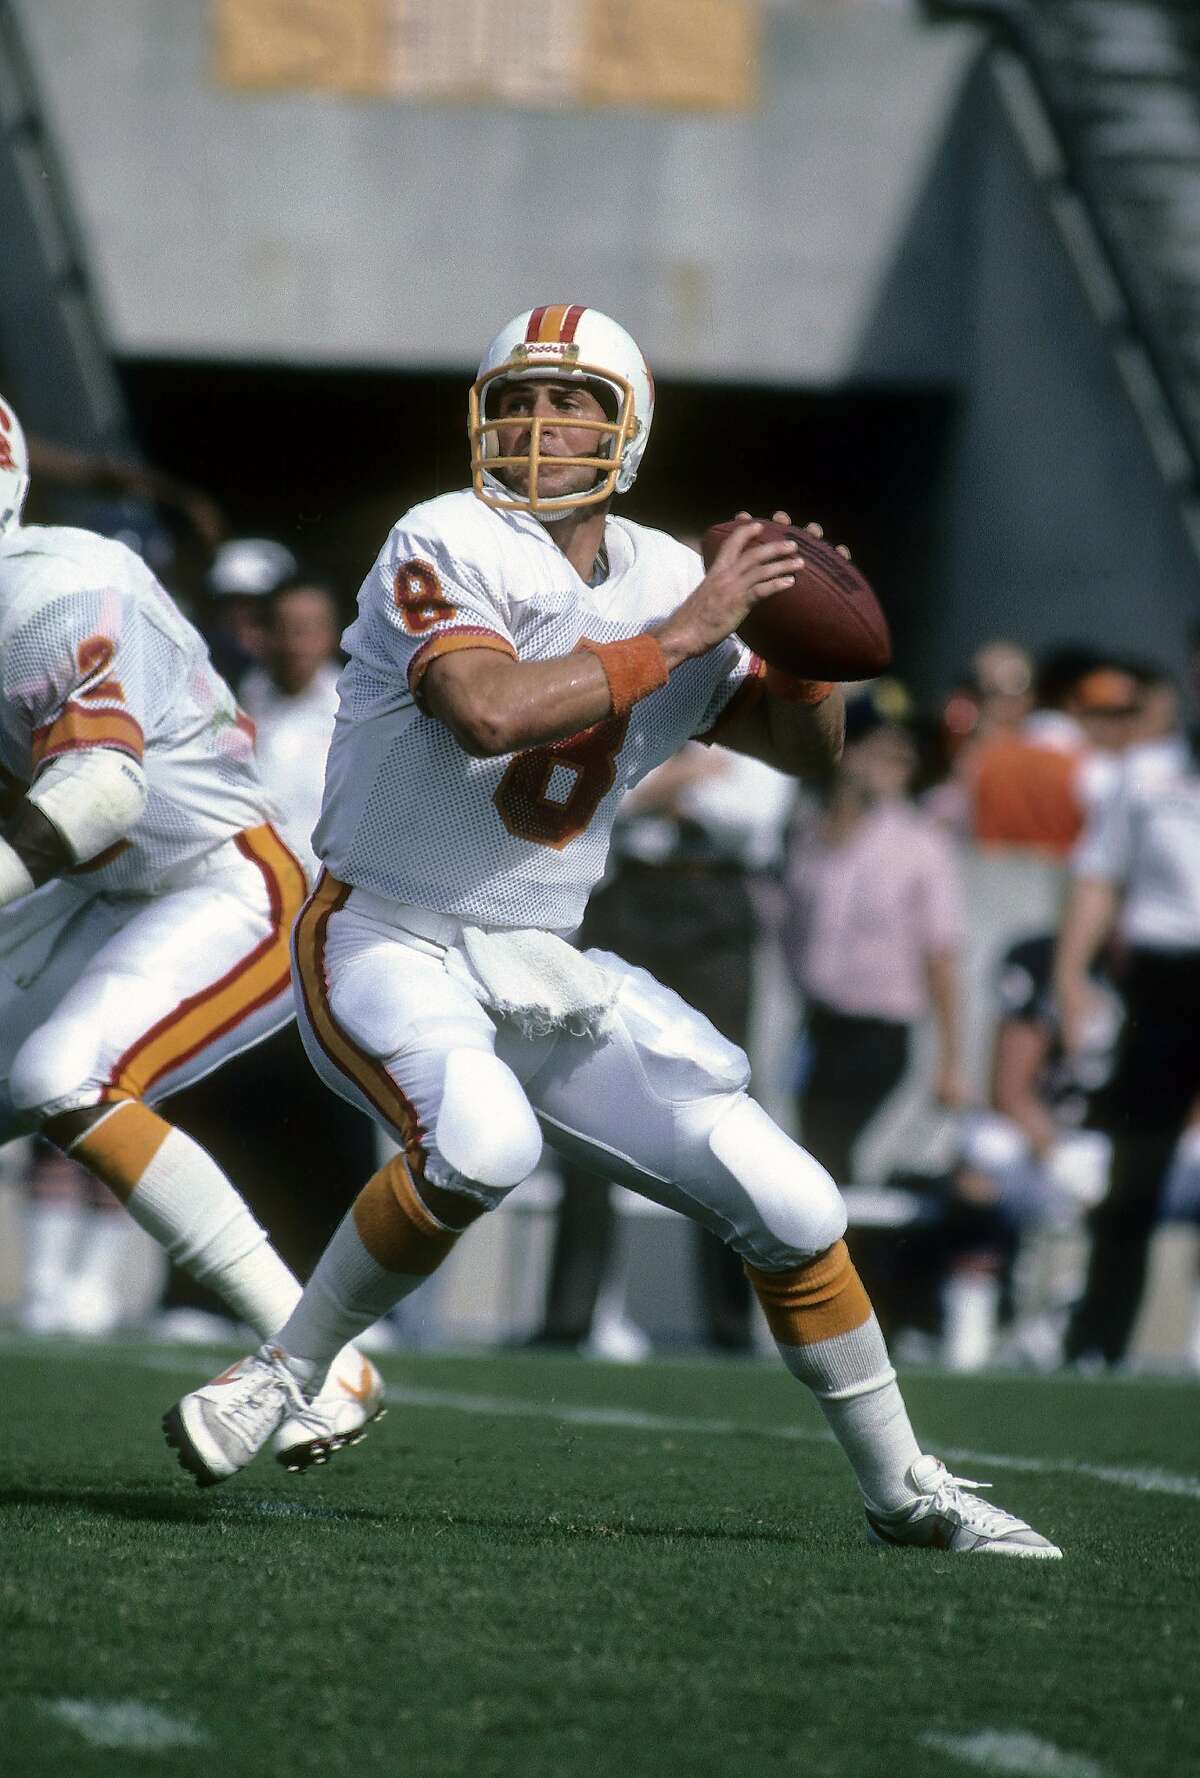 CHICAGO, IL - CIRCA 1980's: Quarterback Steve Young #8 of the Tampa Bay Buccaneers drops back to pass against the Chicago Bears during a mid circa 1980's NFL football game at Soldiers Field in Chicago, Illinois. Young played for the Buccaneers from 1985-